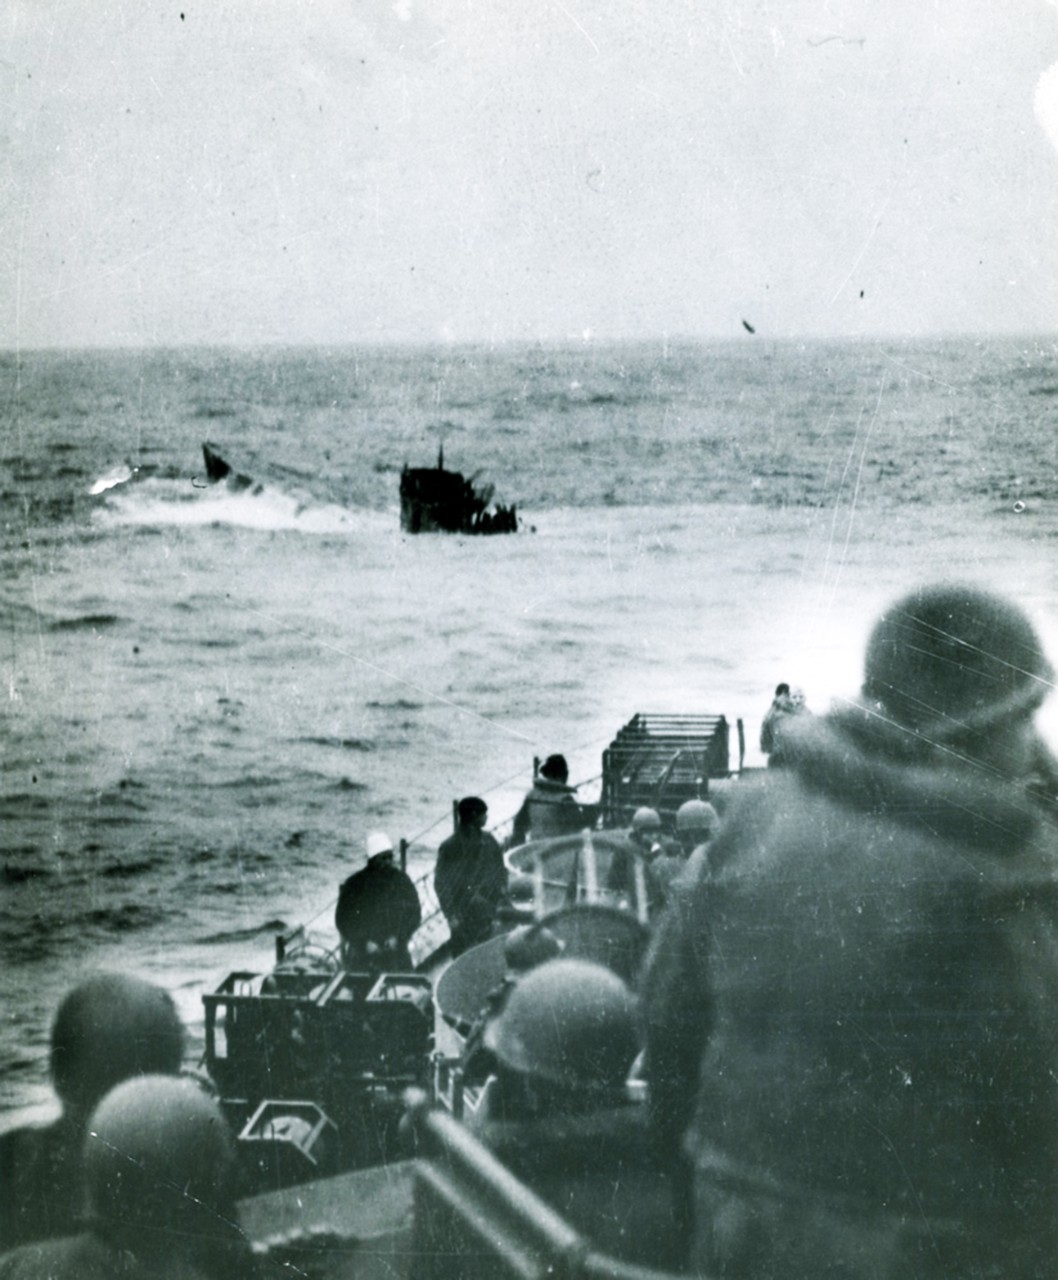 26-G-2552-1:   Sinking of German U-boats, 1944.    German (Type IXC) U-boat, U-550, surfaces astern of USS Joyce (DE 317) after being depth charged, April 16, 1944.  Joyce had a Coast Guard crew.  U.S. Coast Guard photograph now in the collections of the National Archives, 26-G-2552 (Cropped). 